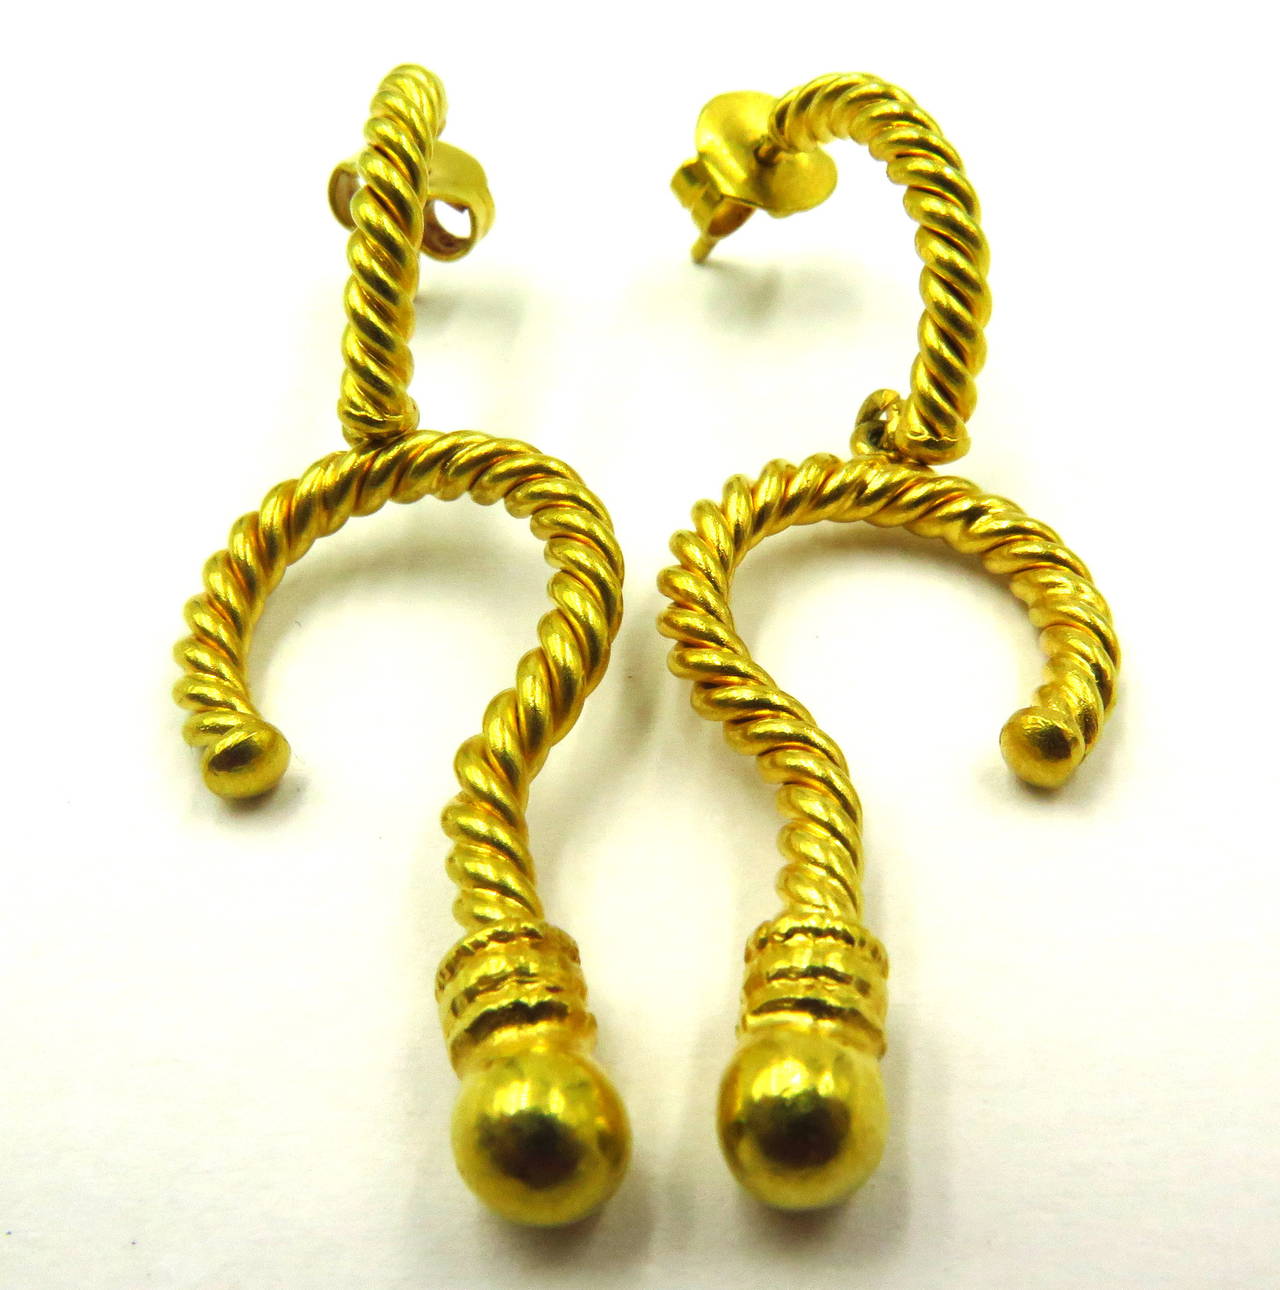 These edgy question marks will keep them guessing......
They are made to look like 1/2 hoops of rope on top and have a matching rope motif question mark hanging down. There is a right and a left. They measure 2